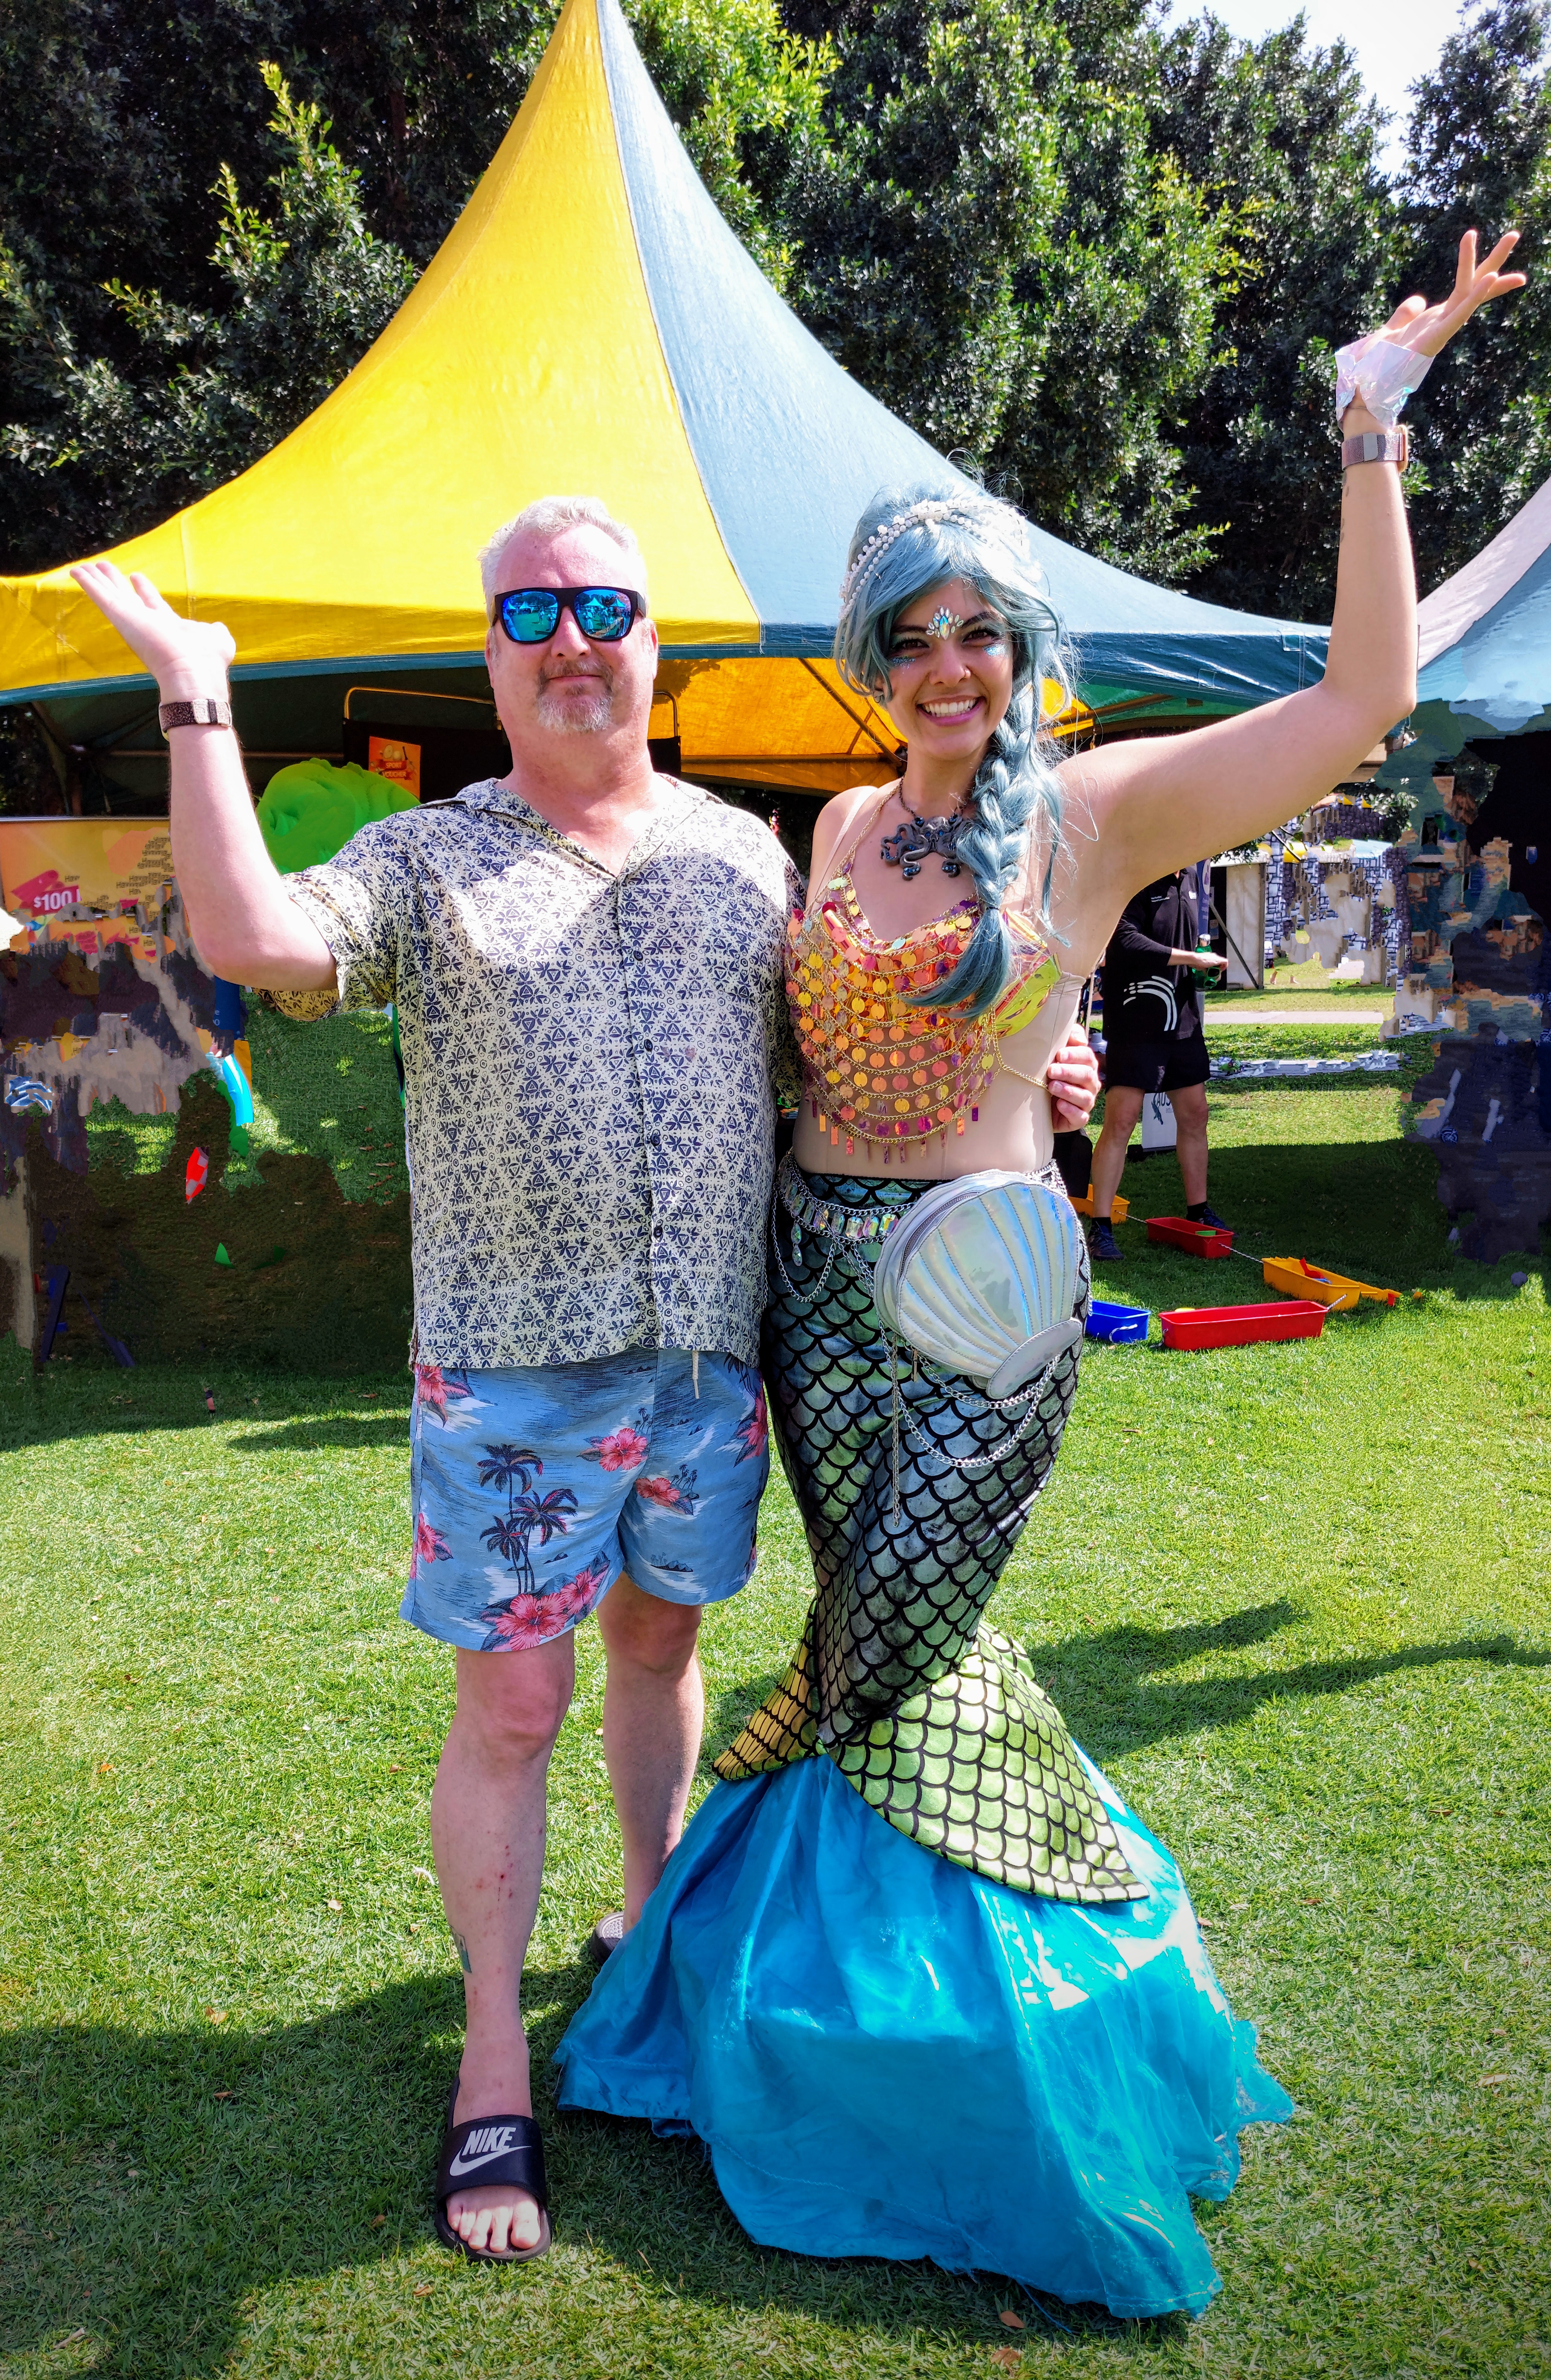 In front of a fair tent Mike stands with his arm extended next to a woman dressed as a mermaid as she does the same. It's a sunny Darwin day and everyone is smiling.